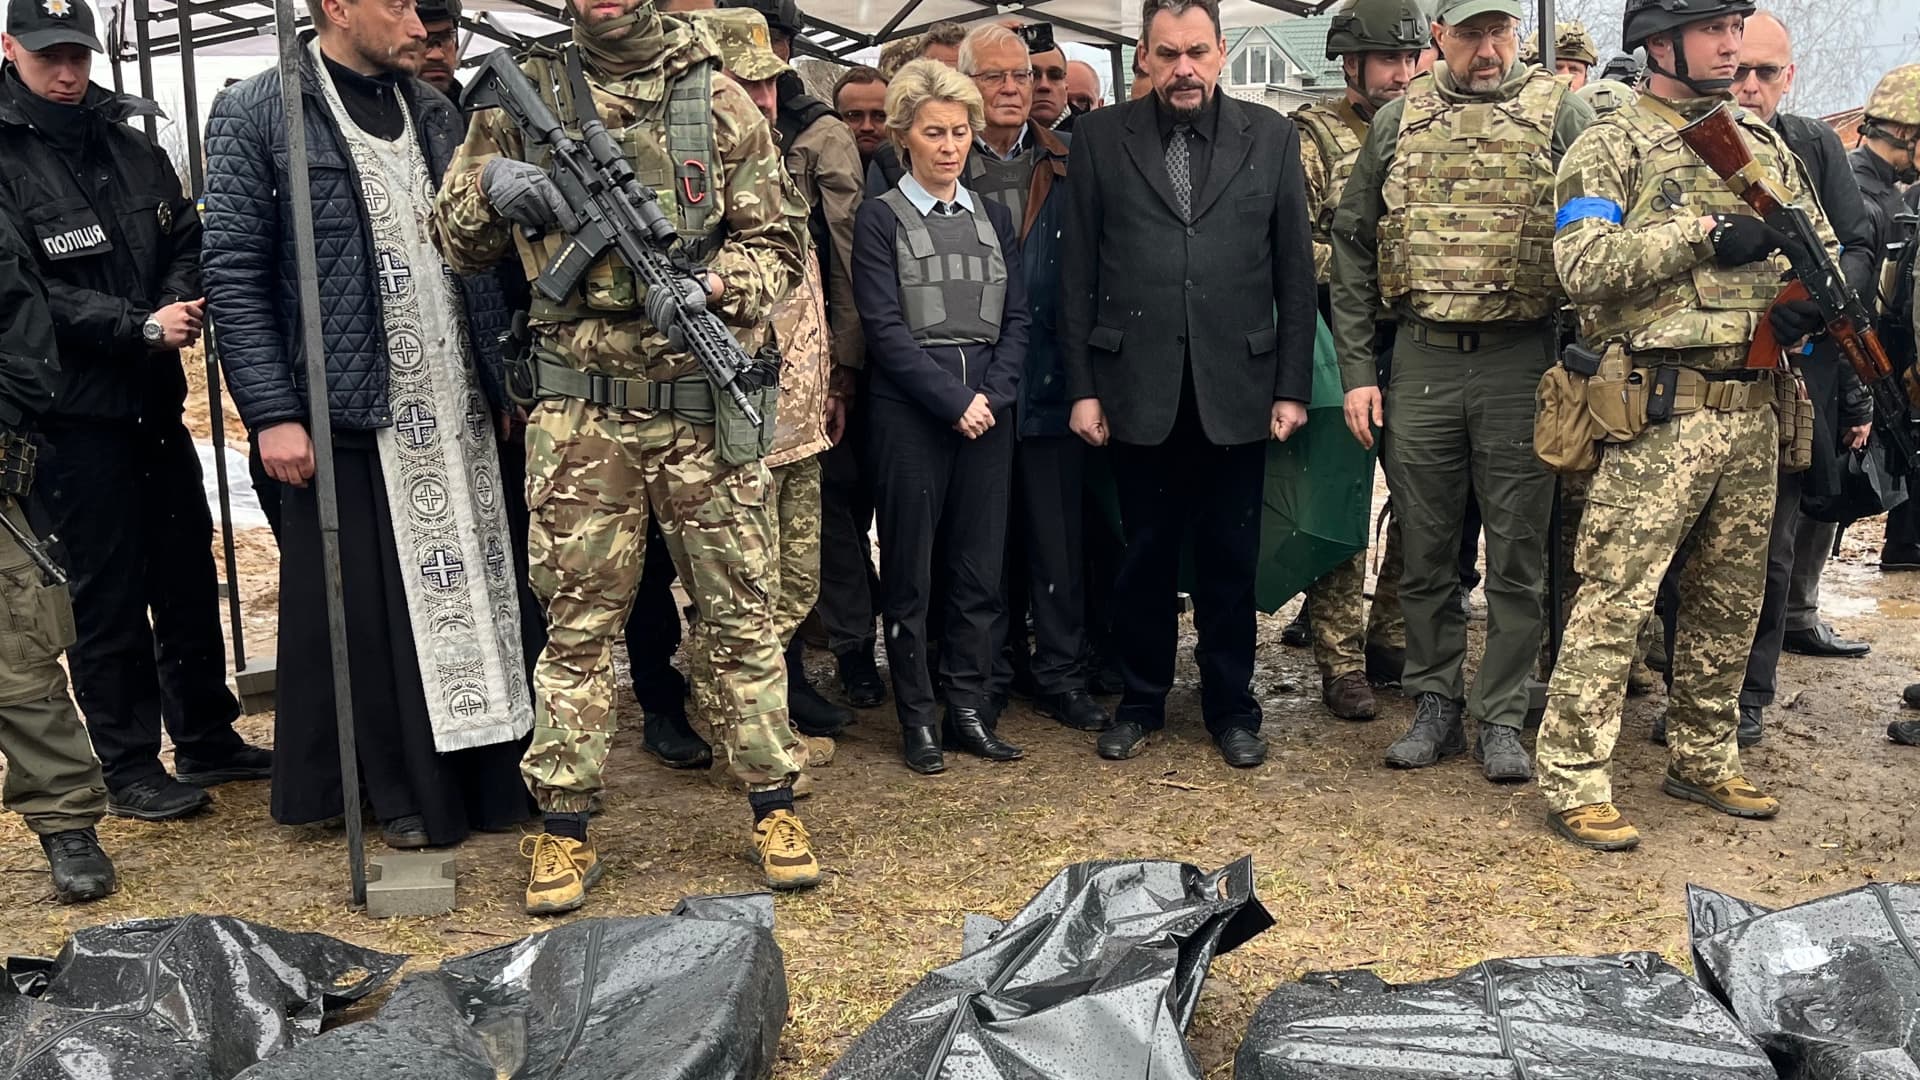 EU Commission President Ursula von der Leyen (M) and EU High Representative for Foreign Affairs Josep Borrell (behind) and Denys Shmyhal (green cap), Prime Minister of Ukraine, stand behind body bags in Bucha on April 8th, 2022.